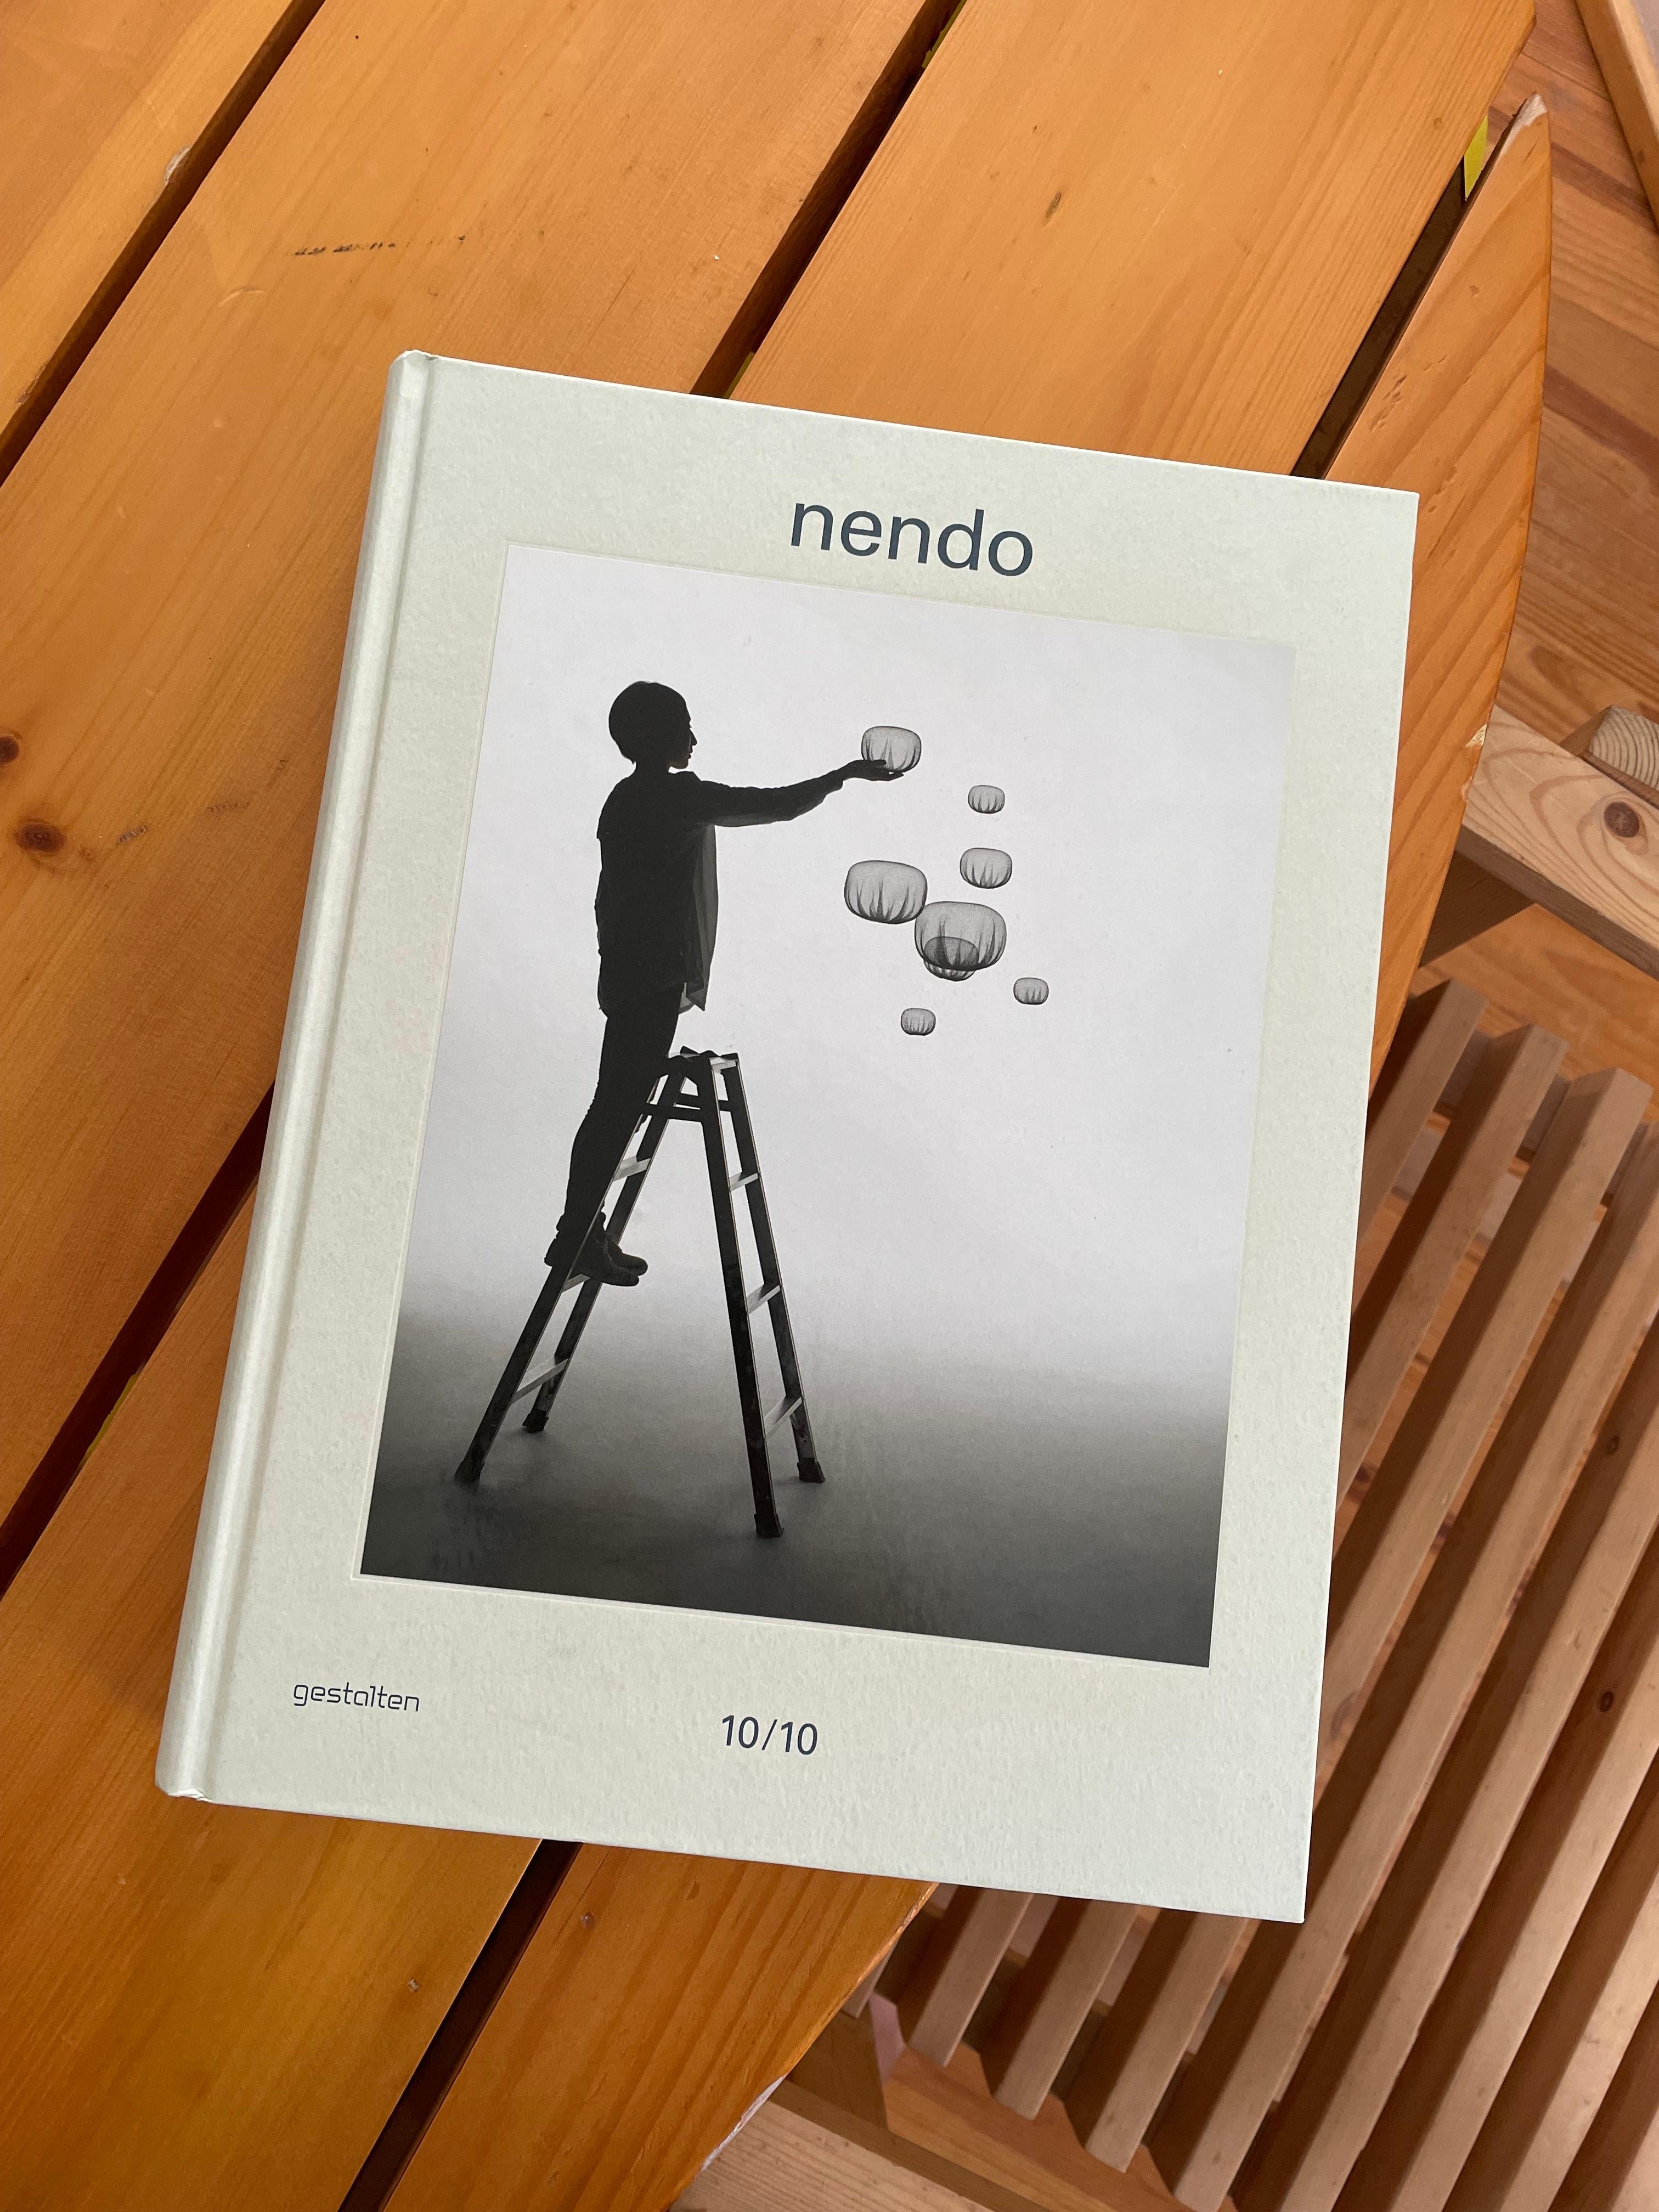 This comprehensive monograph presents a striking selection of Nendo’s astonishingly multifaceted work including vibrant store concepts, mystically inspired exhibition spaces, sculptural furniture pieces, home accessories, and design objects.

The